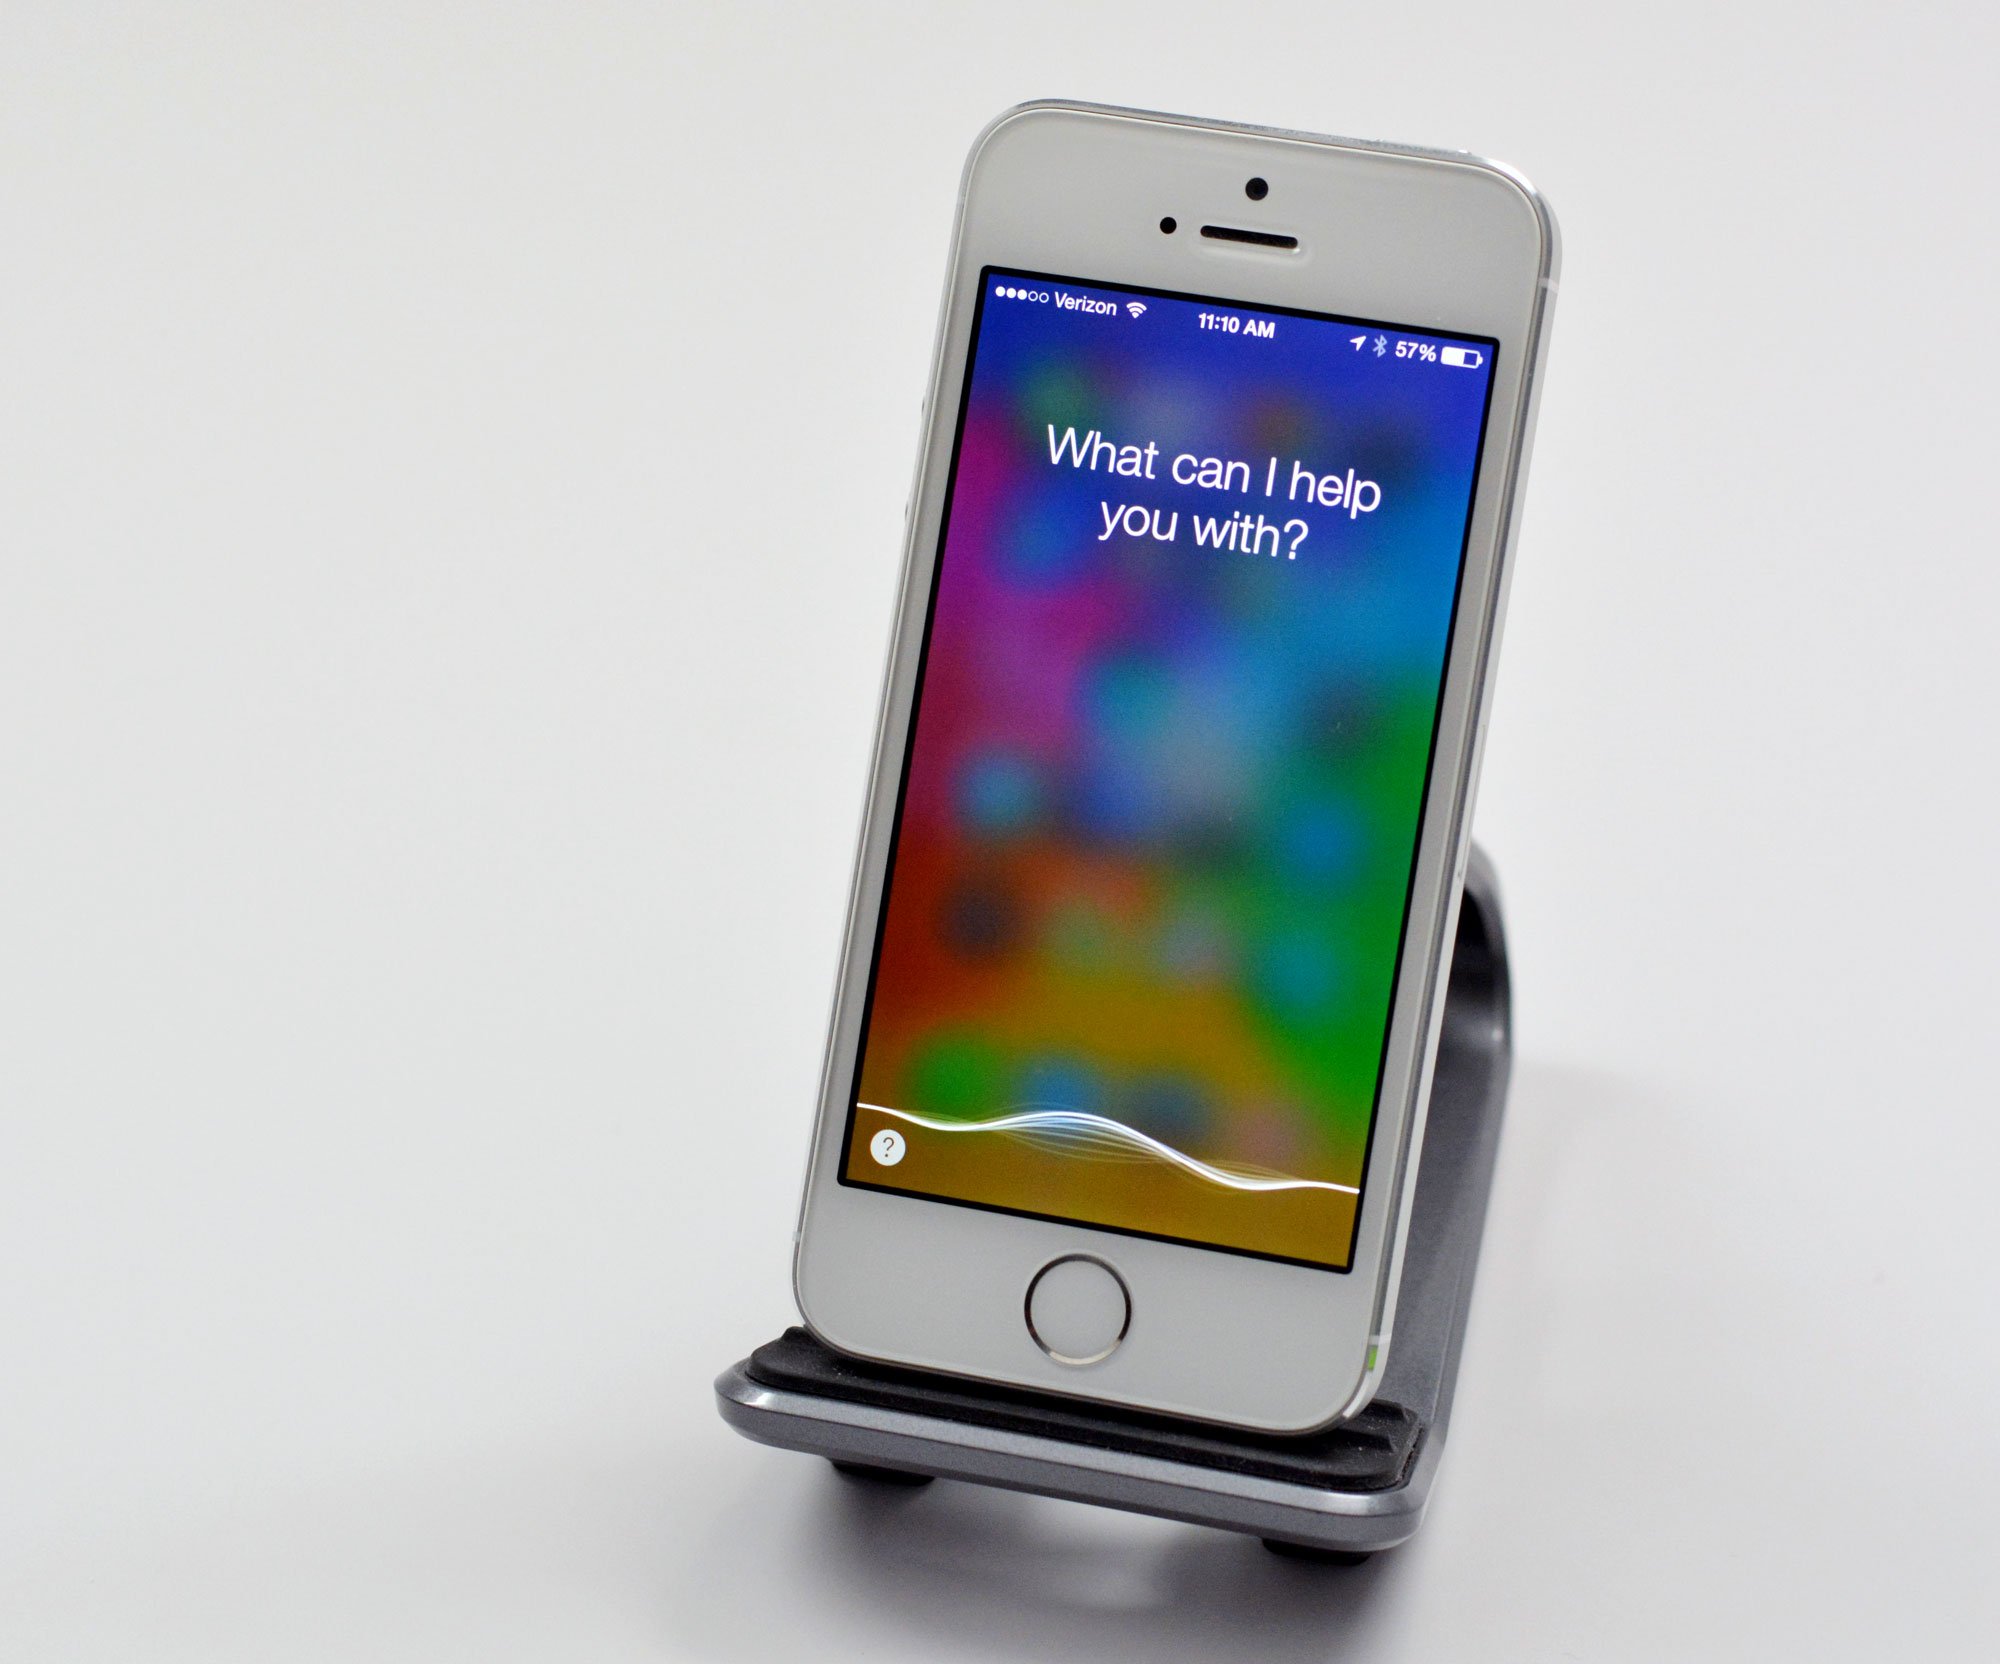 You can now make calls easier with Hey Siri on iOS 8.3.